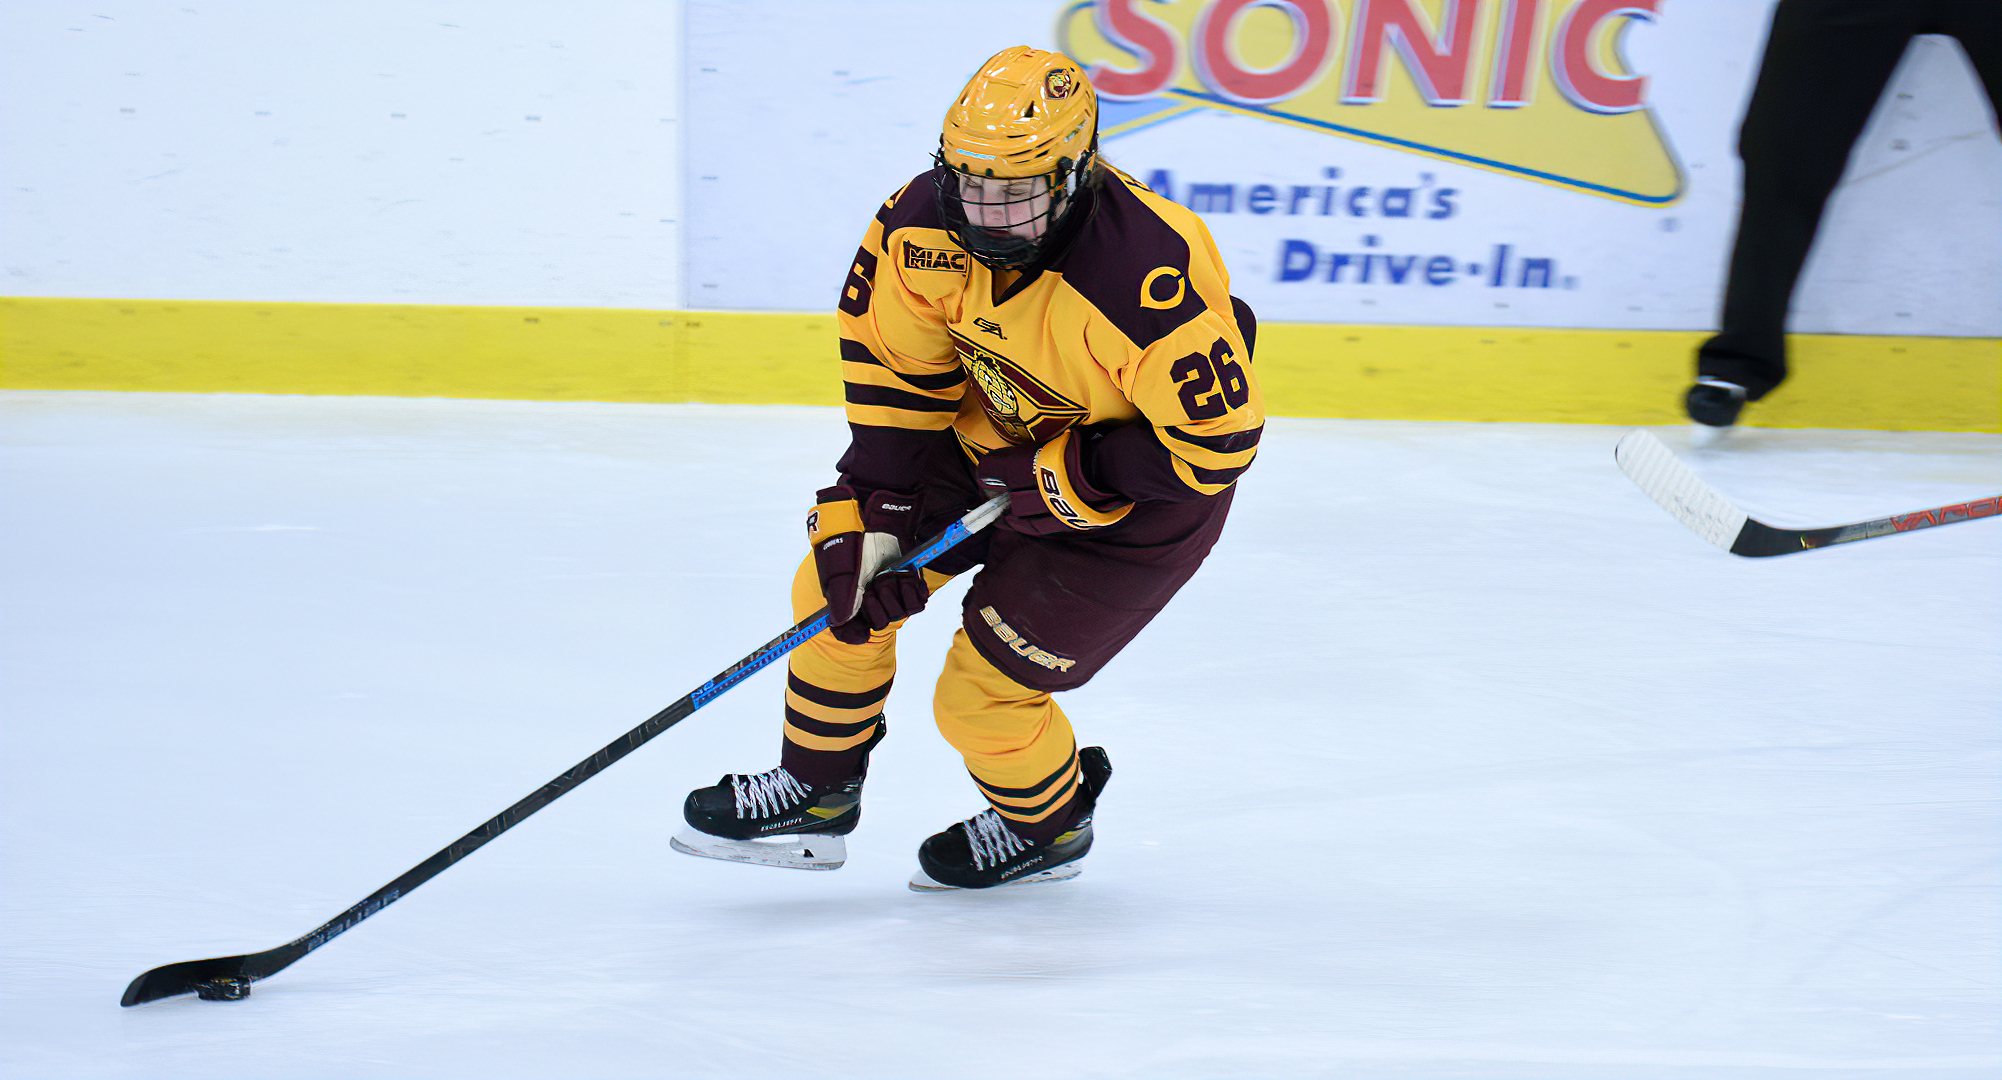 Josie Hell scored her fourth goal of the season in the Cobbers' series finale at St. Scholastica.